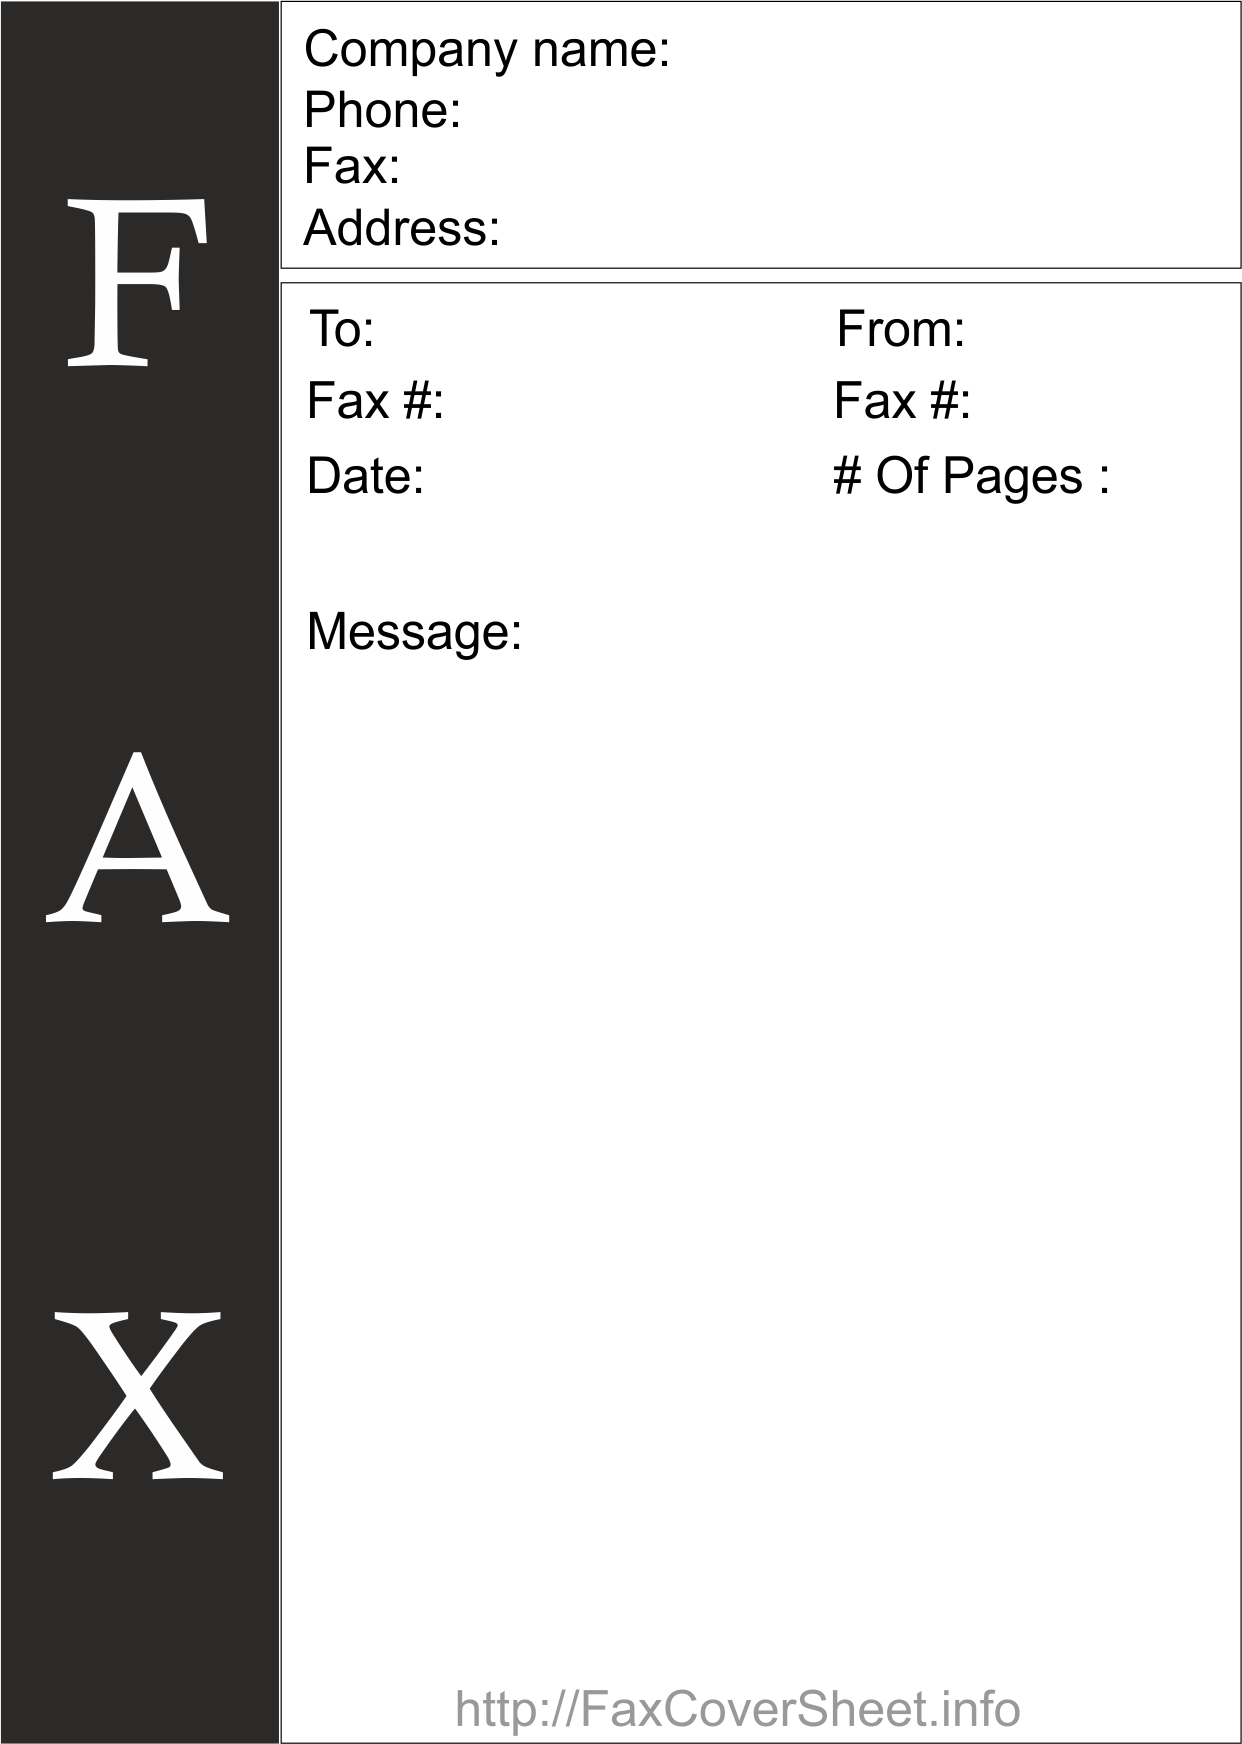 How To Write a Fax Cover Letter